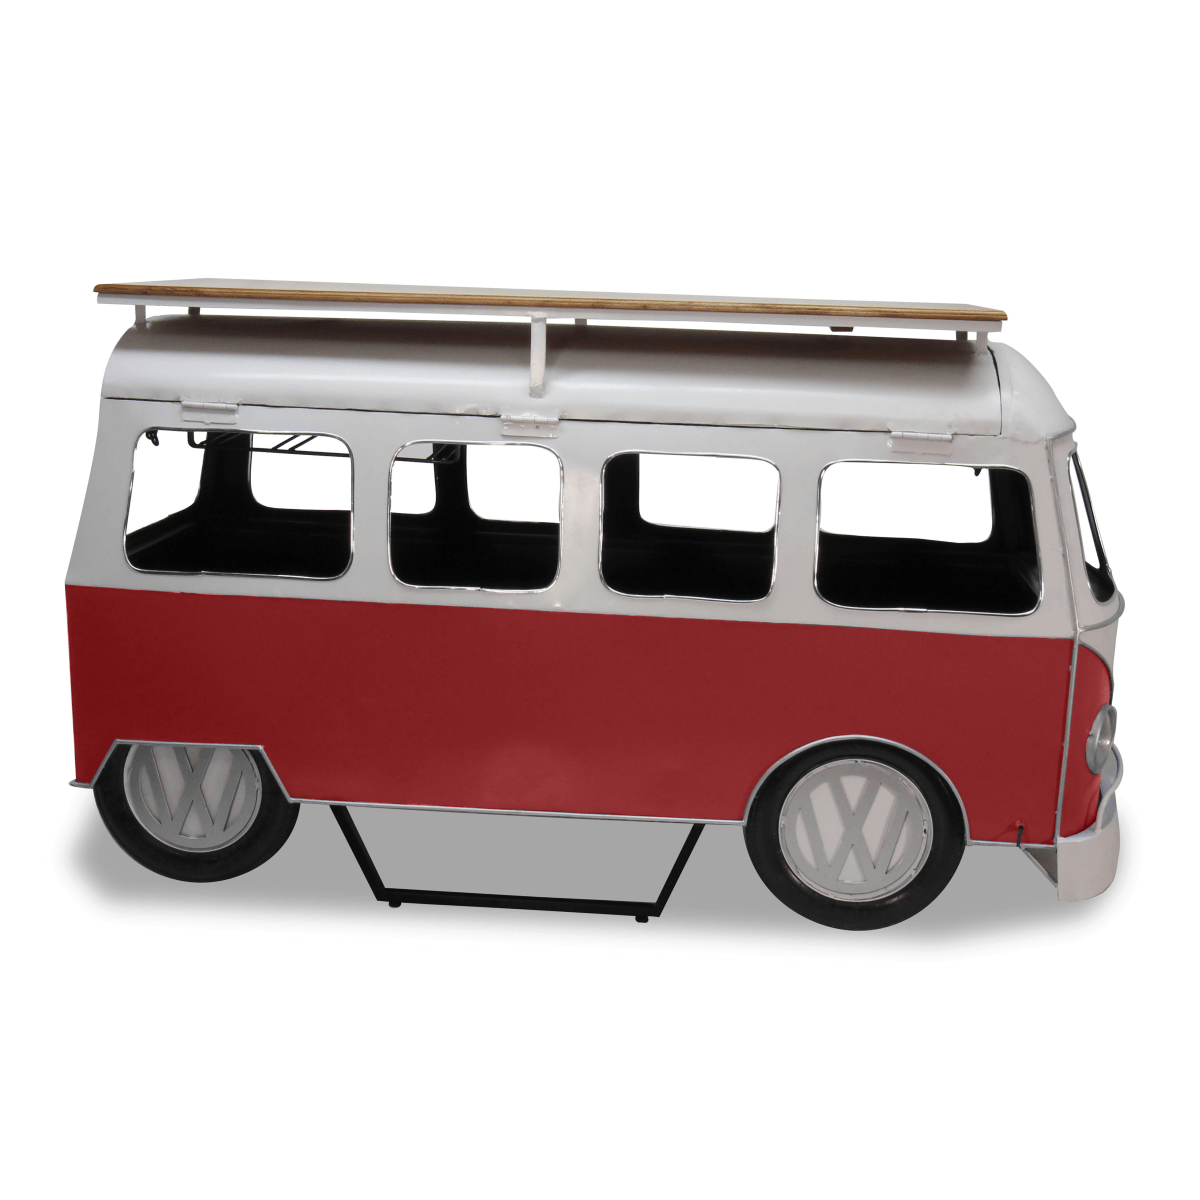 Volkswagon VW Bus Classic Car Bar Cart - Red White - Storage - Lamps